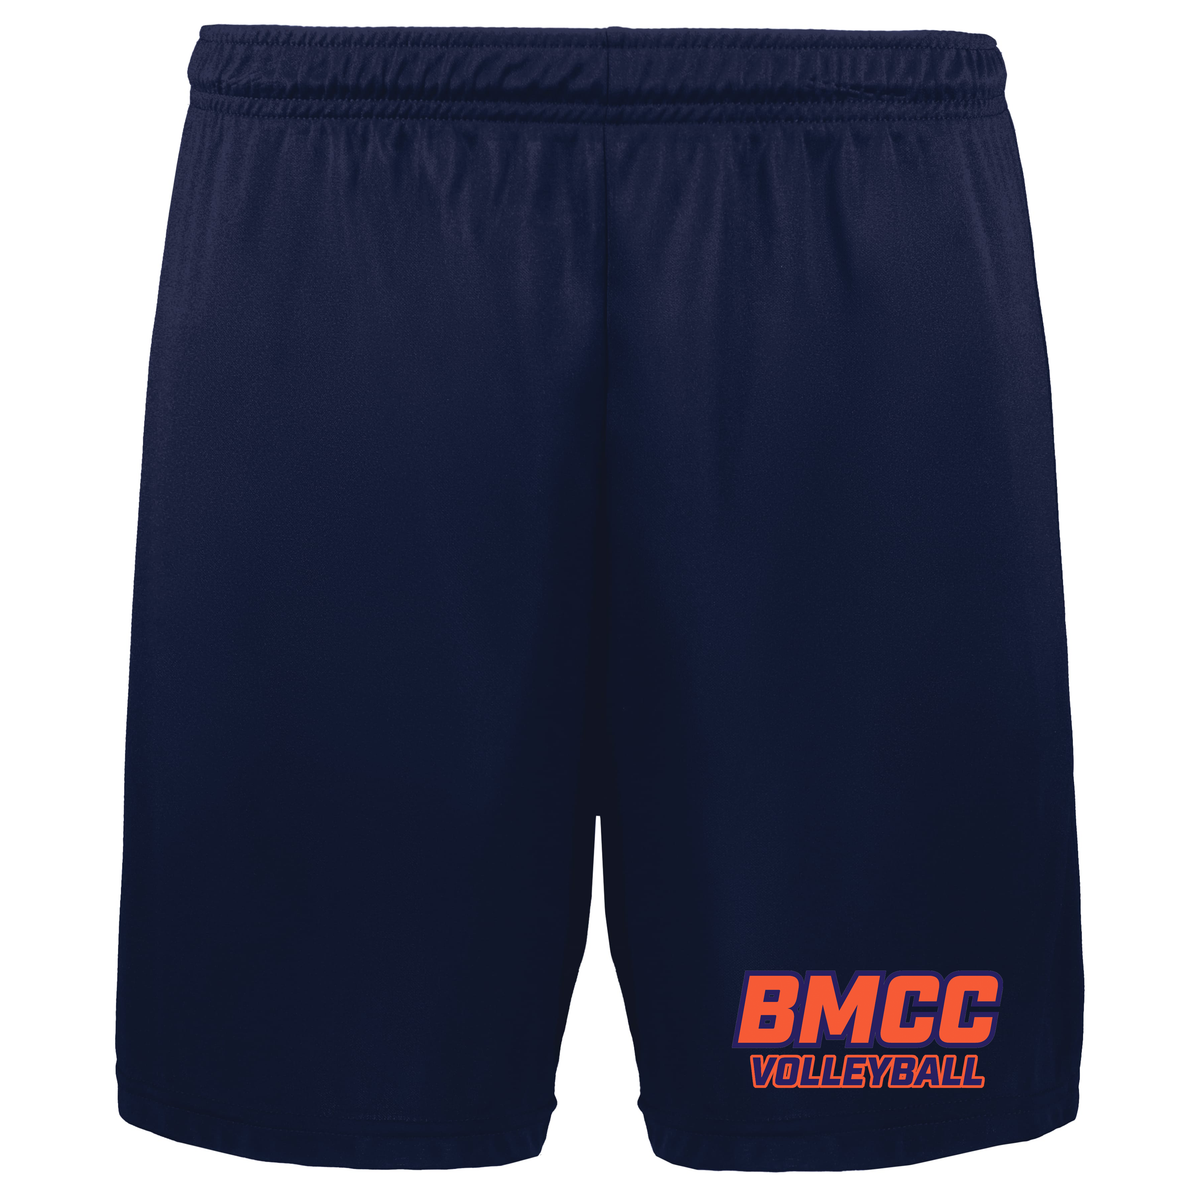 BMCC Volleyball Primo 2.0 Shorts